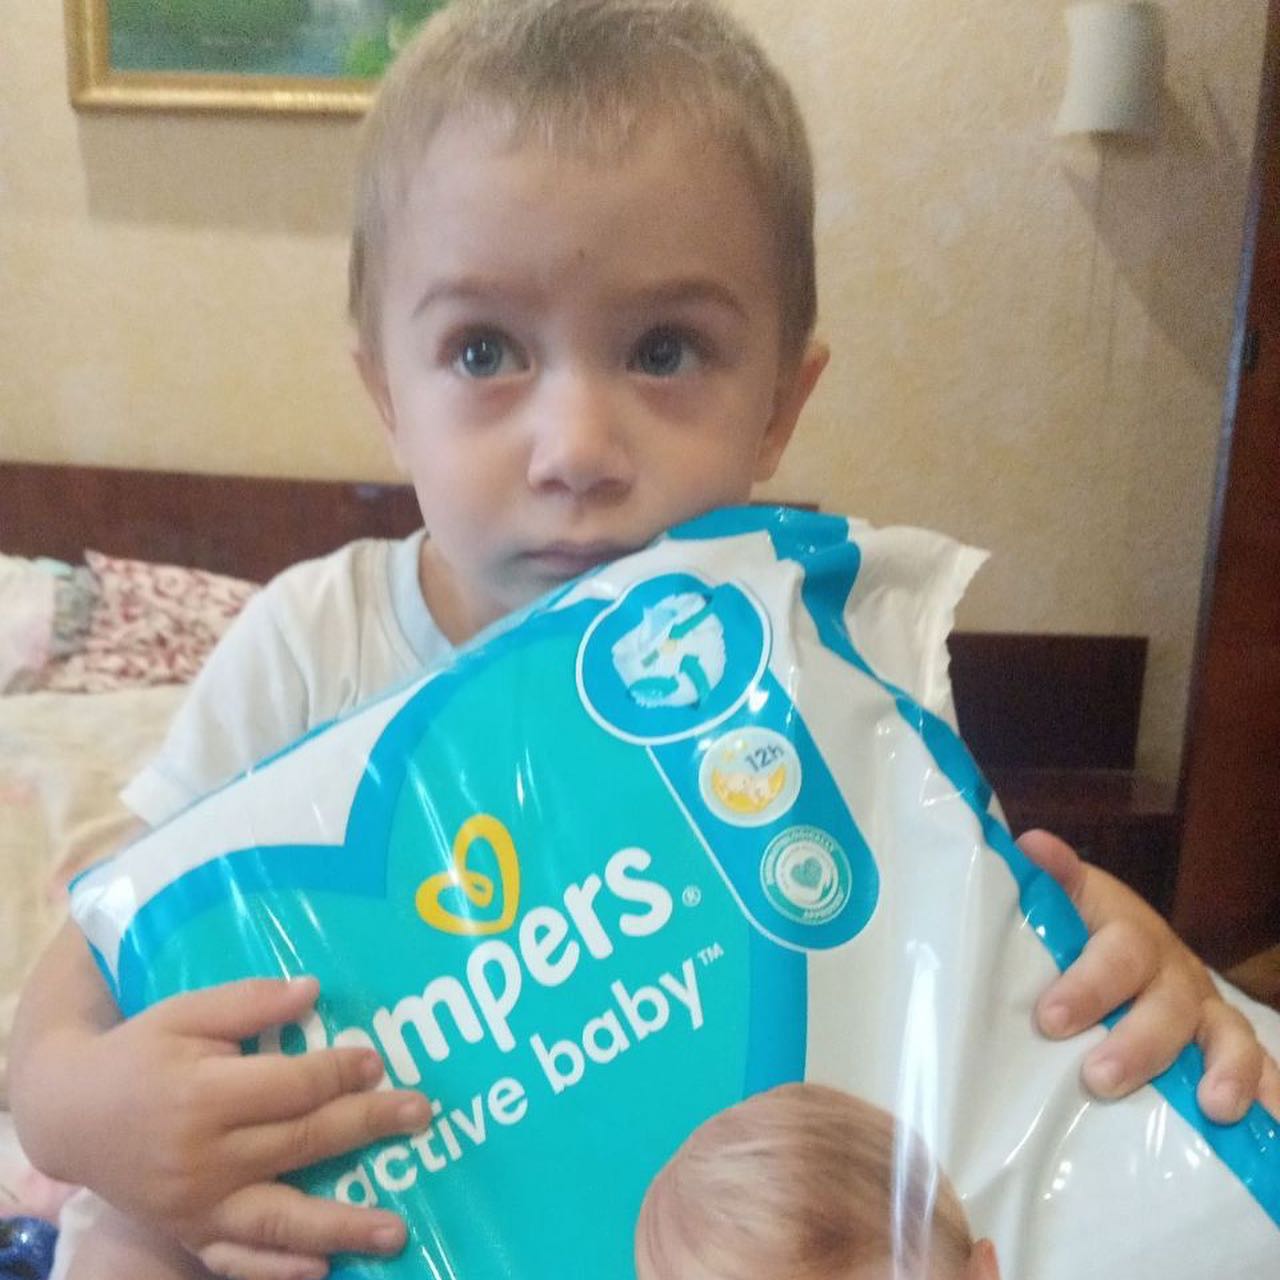 A little boy holding up a pack of pampers natural baby diapers.